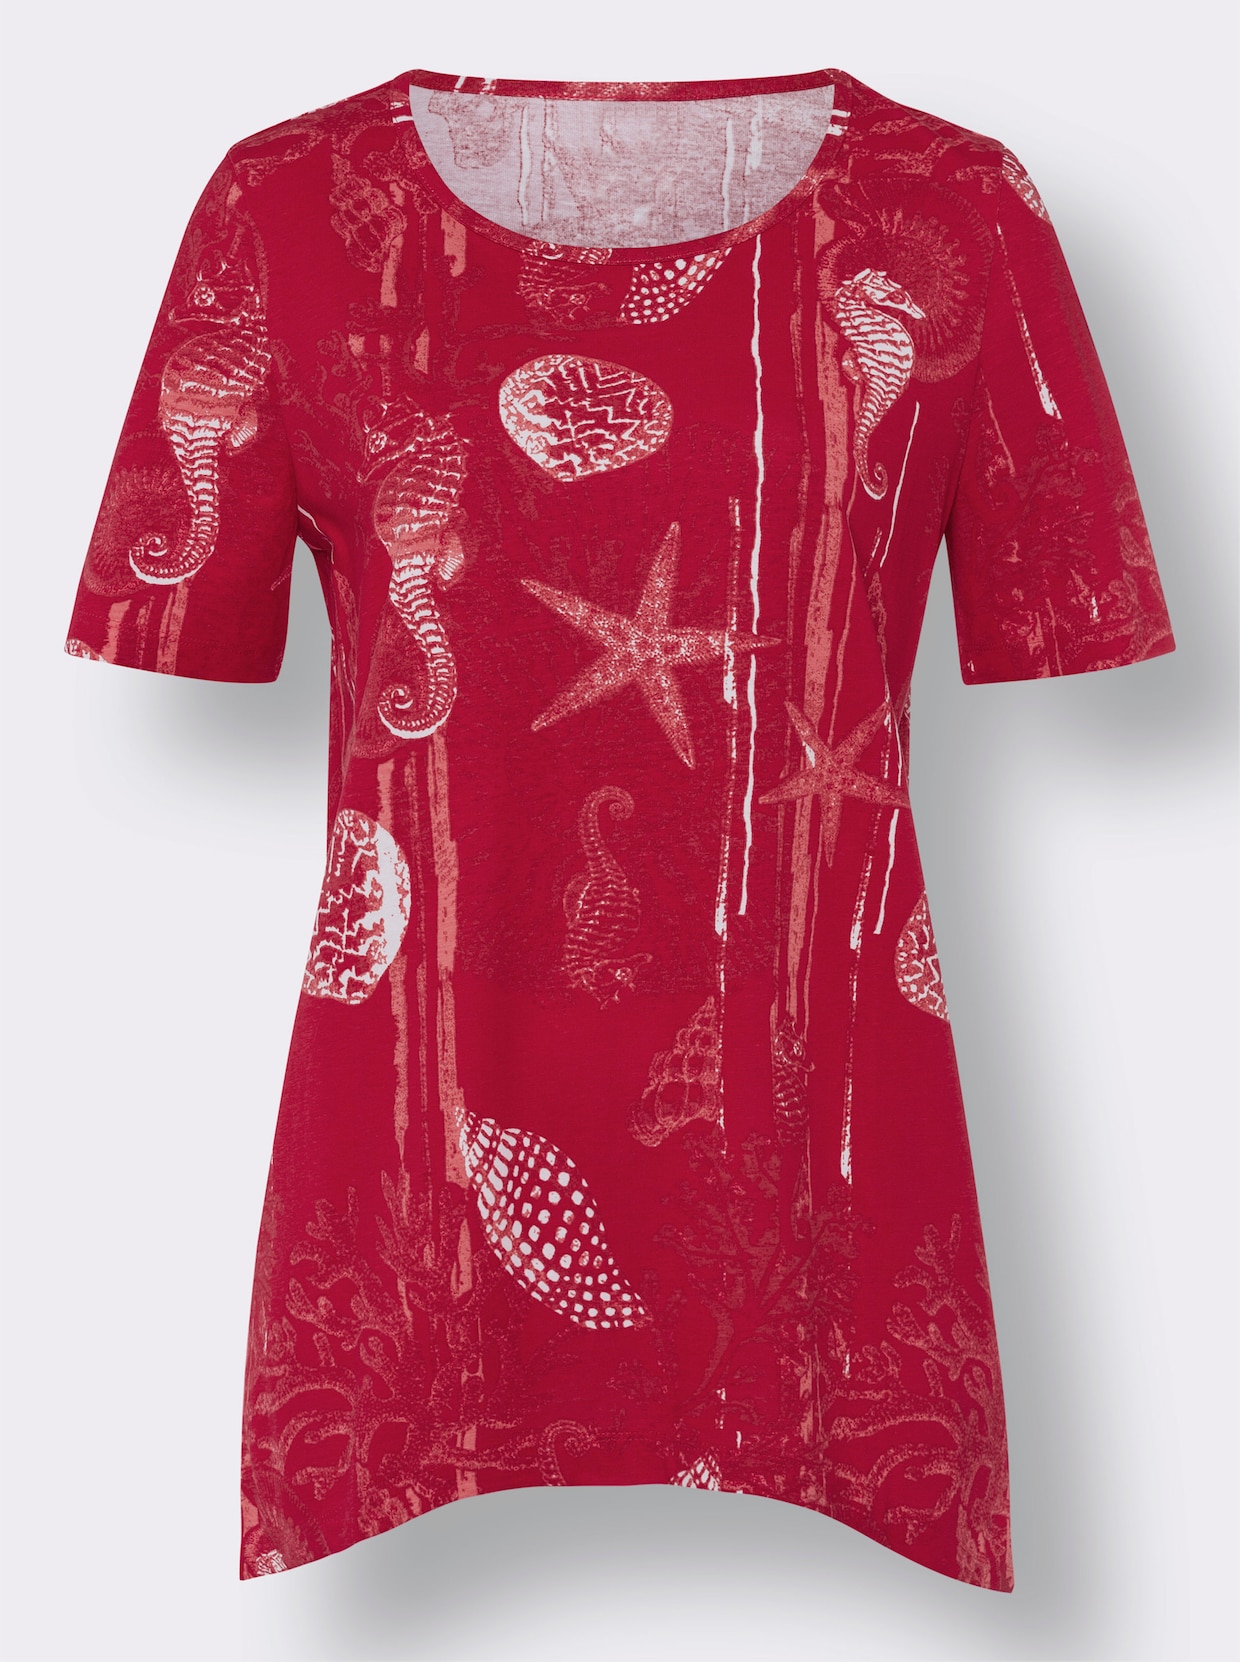 Puntig shirt - rood/wit geprint